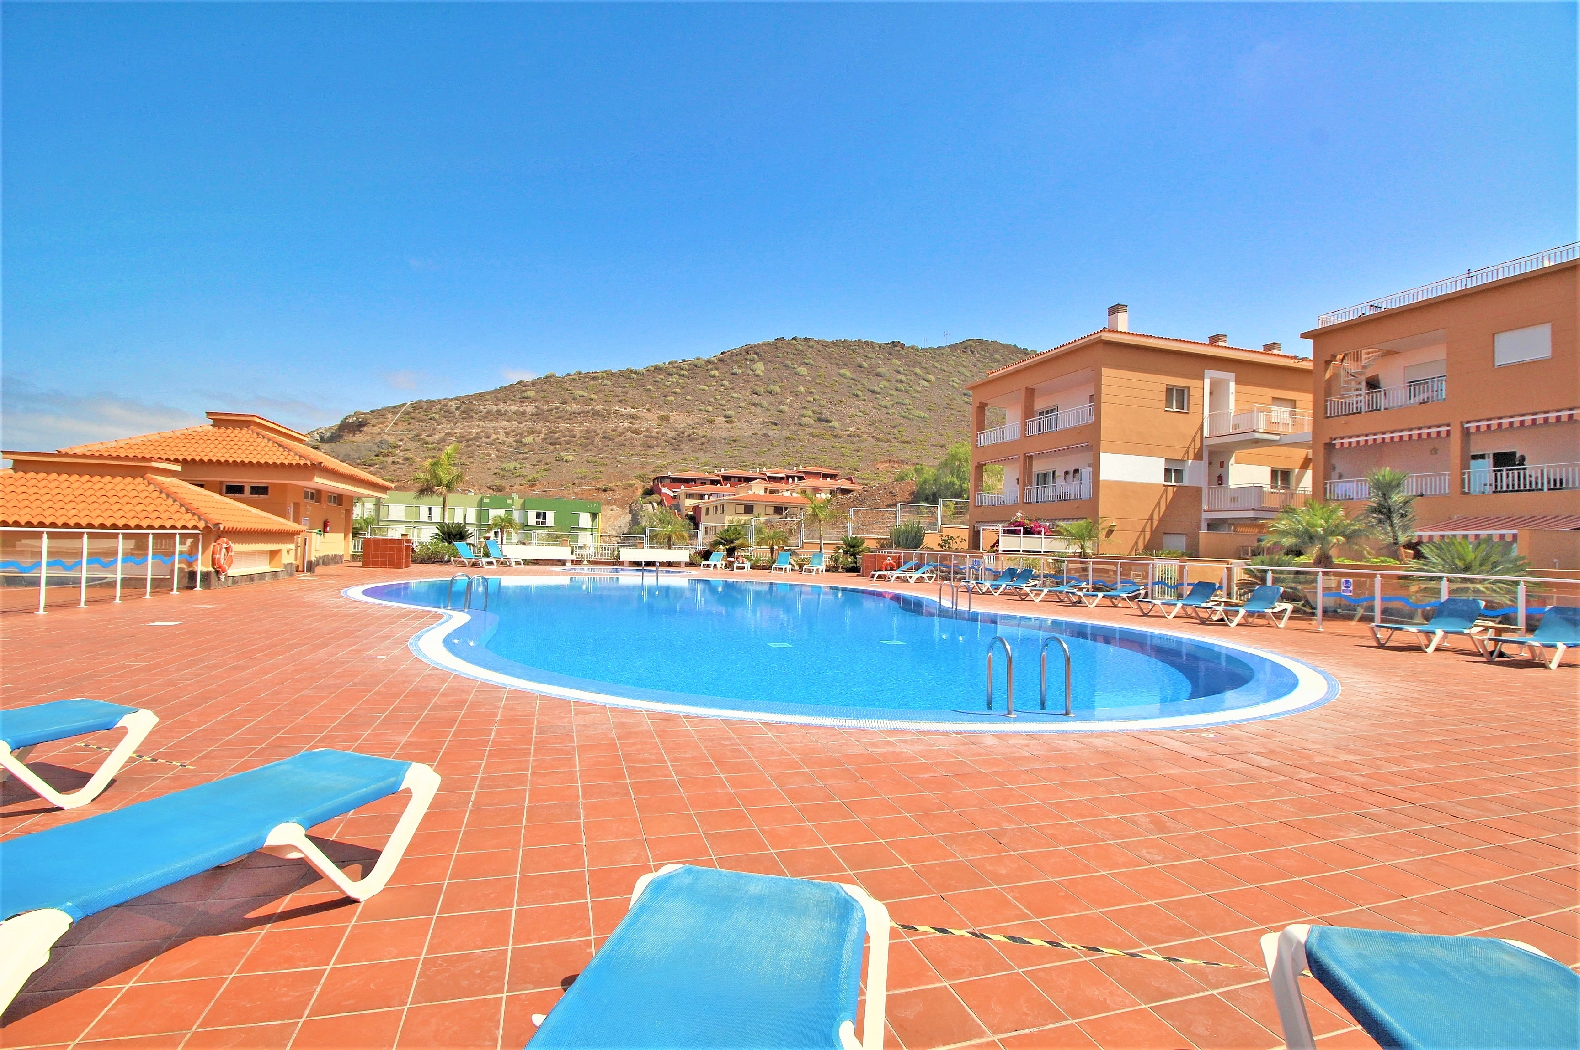 Apartment in El Madroñal marketed by Clear Blue Skies